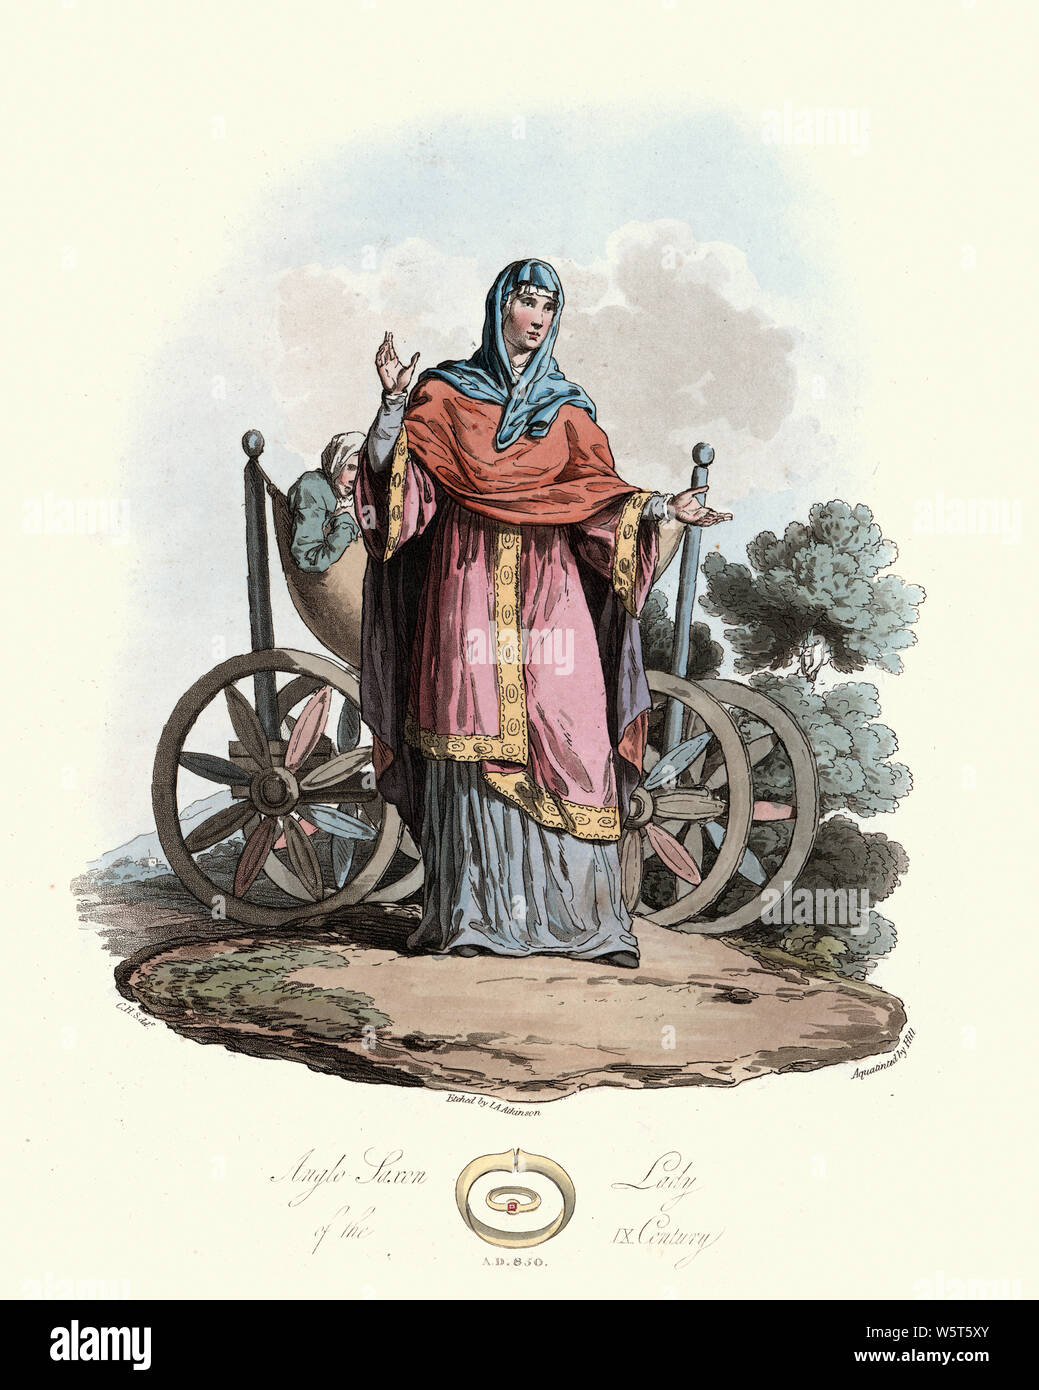 Vintage engraving of Costumes of Anglo Saxon woman of 9th Century England. Ancient costumes of England, 1813 Stock Photo